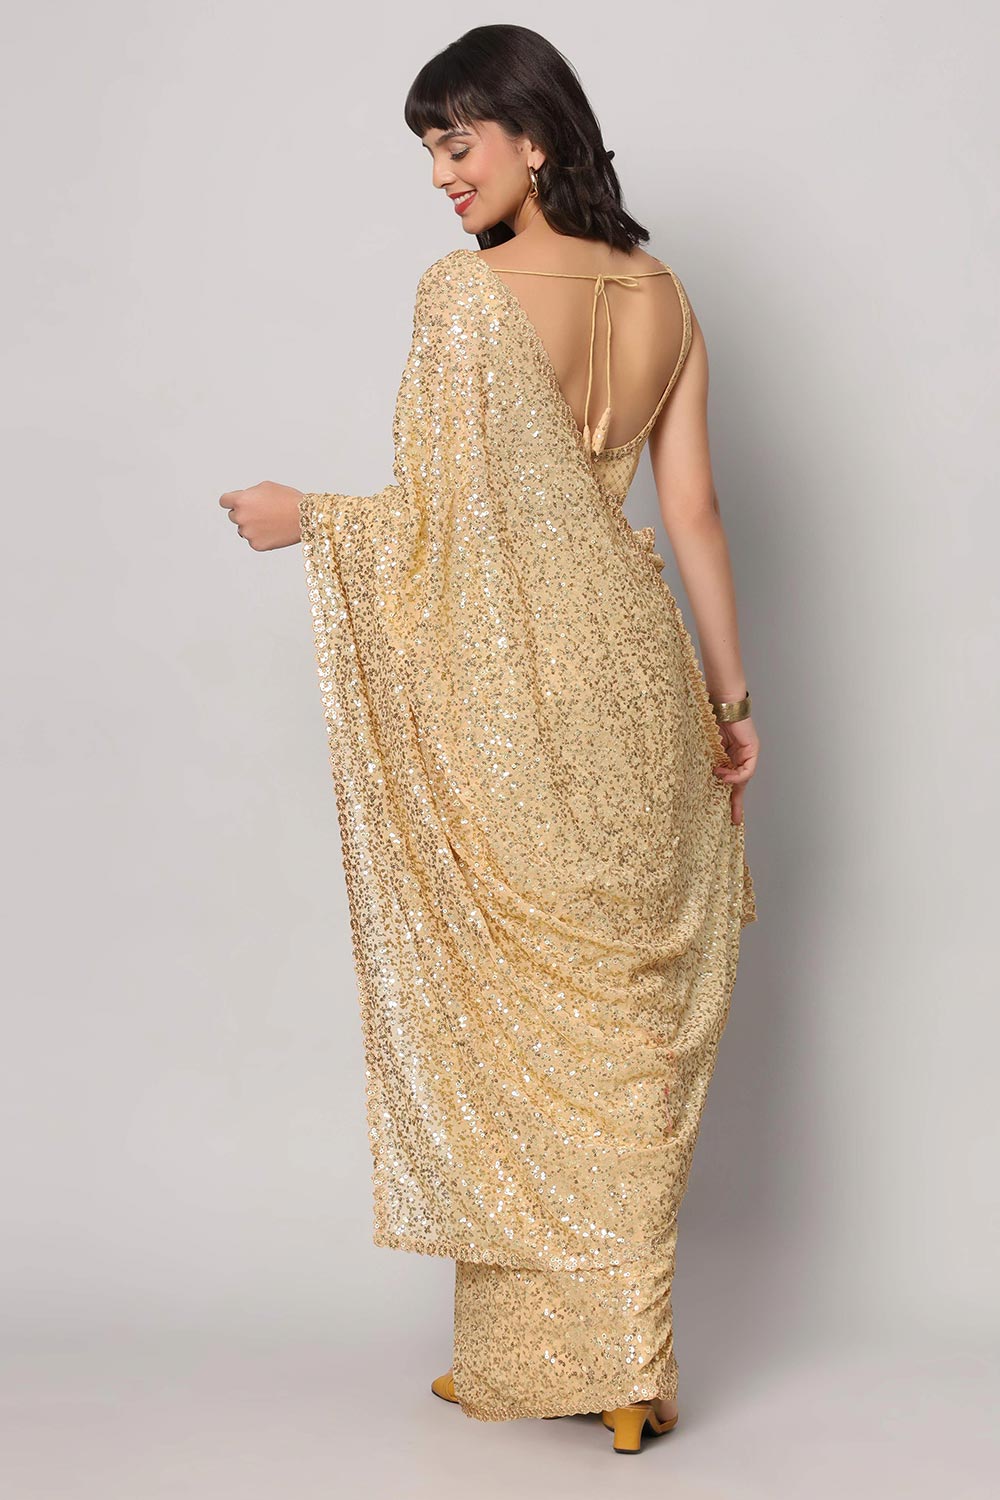 Shop Kylie Beige Georgette Gold Sequin Embroidery One Minute Saree at best offer at our  Store - One Minute Saree